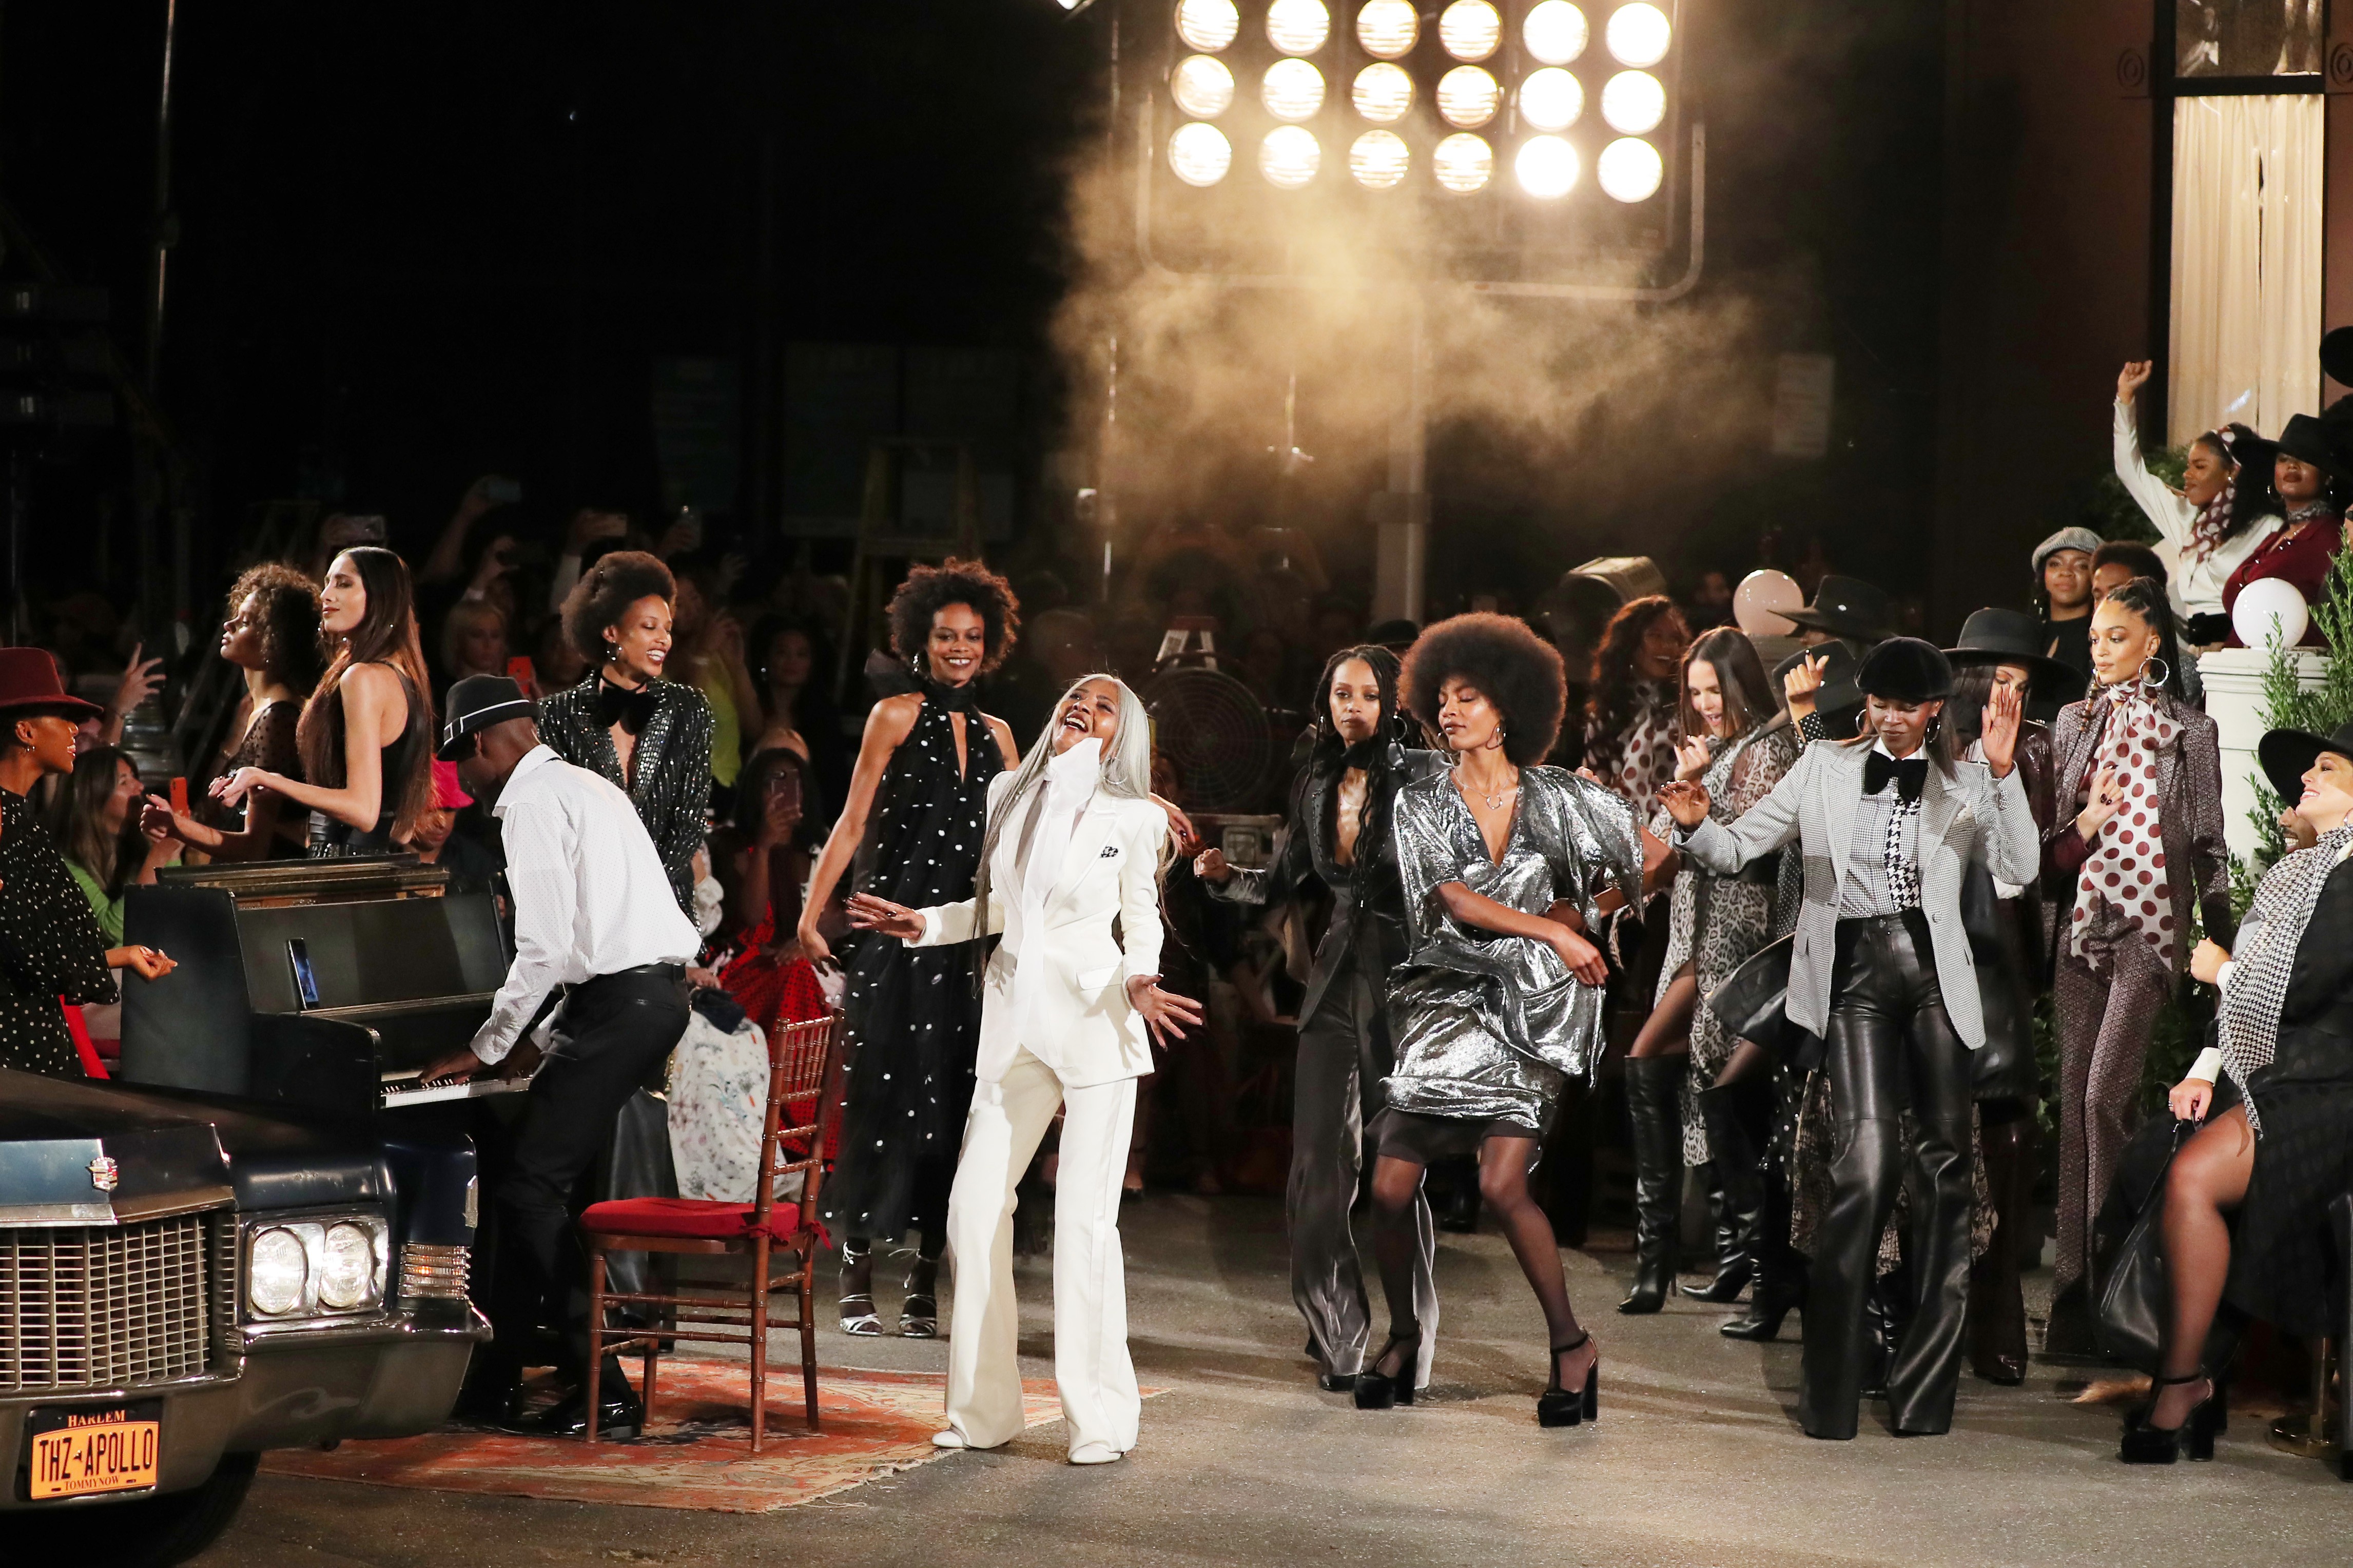 NEW YORK, NEW YORK - SEPTEMBER 08: Models walk the runway during the TOMMYNOW New York Fall 2019 fashion show at The Apollo Theater on September 08, 2019 in New York City. (Photo by Thomas Concordia/Getty Images for Tommy Hilfiger) (Foto: Getty Images for Tommy Hilfiger)